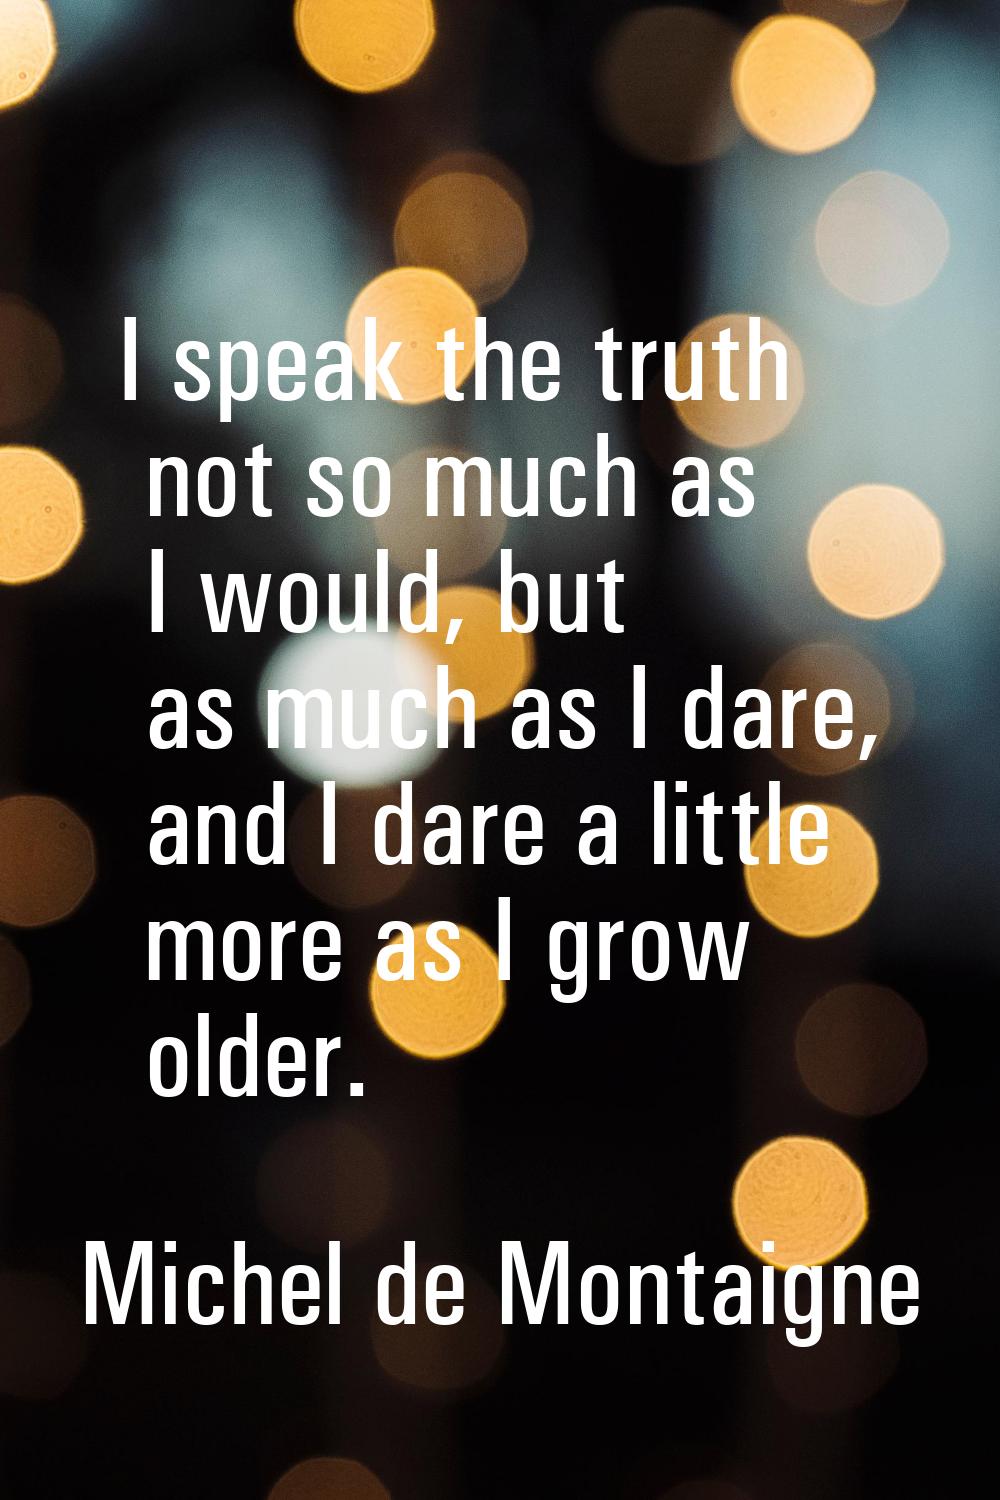 I speak the truth not so much as I would, but as much as I dare, and I dare a little more as I grow